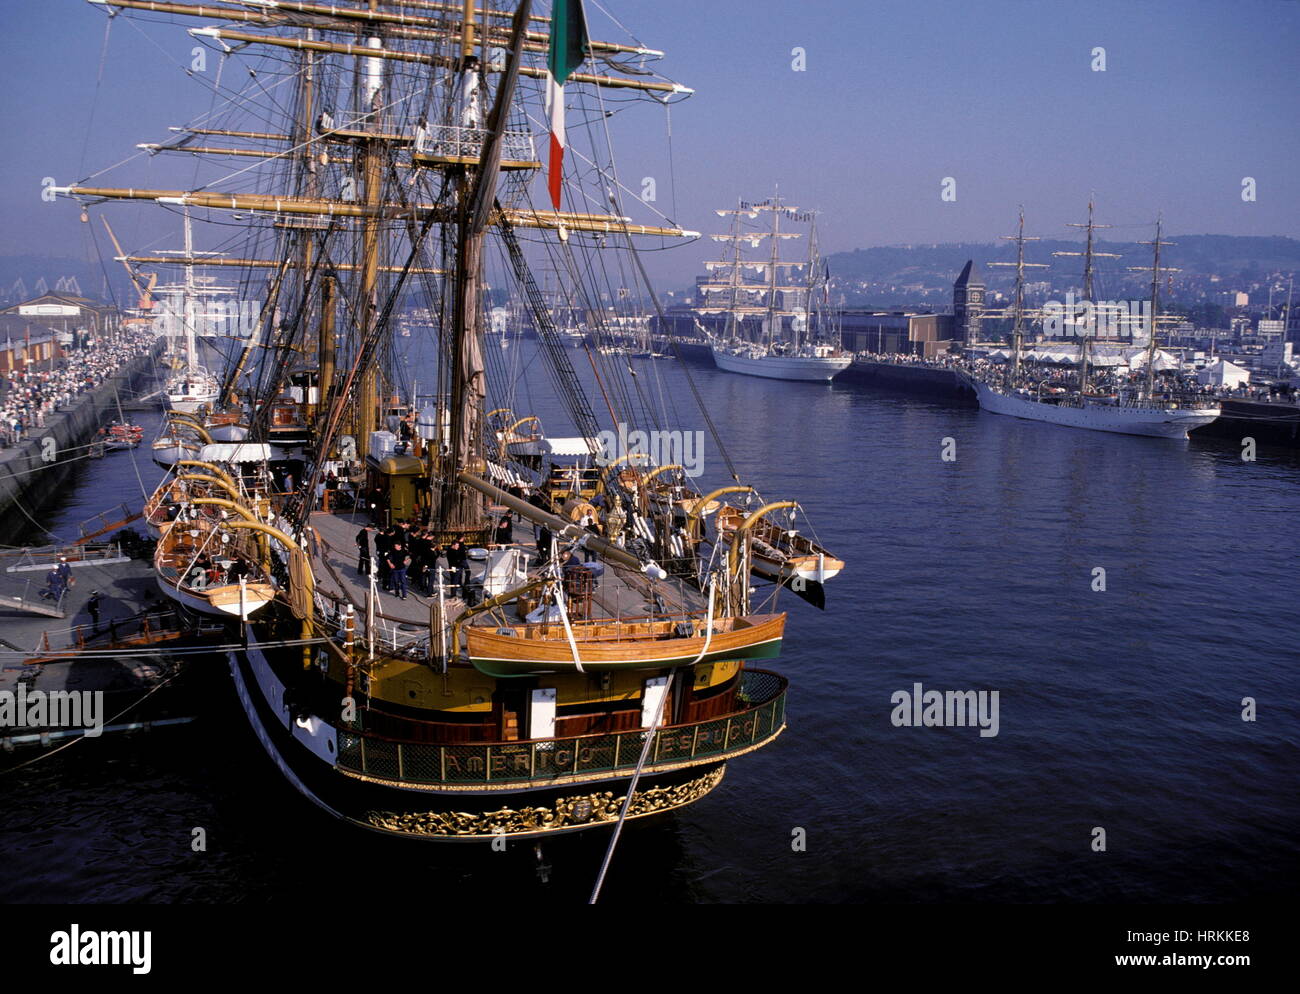 AJAXNETPHOTO. JULY, 1989. ROUEN, FRANCE. - TALL SHIPS LINE THE SEINE - VOILE DE LA LIBERTE - SQUARE RIGGERS WITH ITALY'S AMERIGO VESPUCCI (FRONT LEFT), LINE THE QUAYS OF THE NORMANDY PORT. PHOTO:JONATHAN EASTLAND/AJAX REF:215021 4 107 Stock Photo